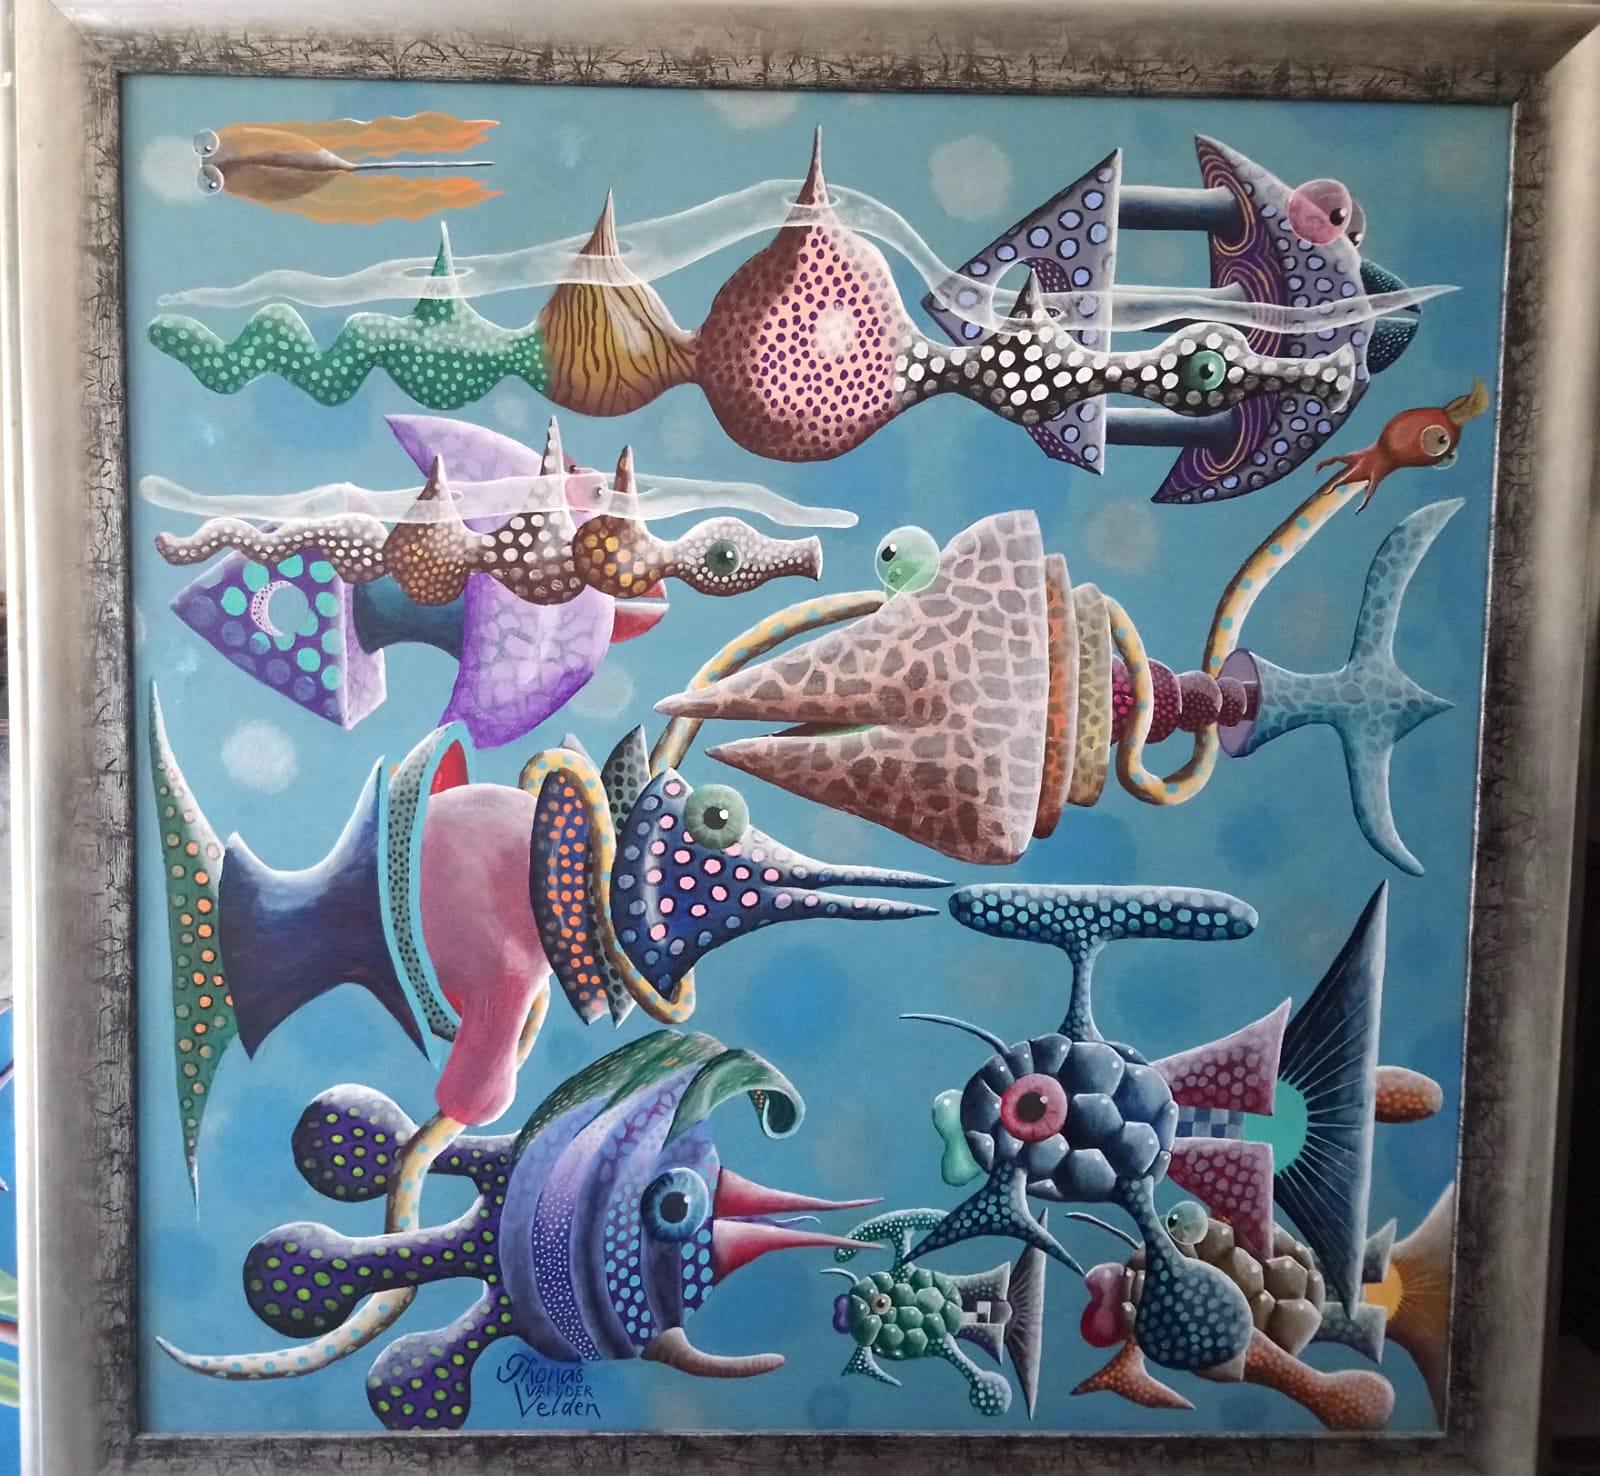 Framework is a oil painting by Thomas Van Der Velden.
This beautiful and colorful framework with sea creatures is signed by Thomas Van Der Velden. Measures: 117 x 117 cm.